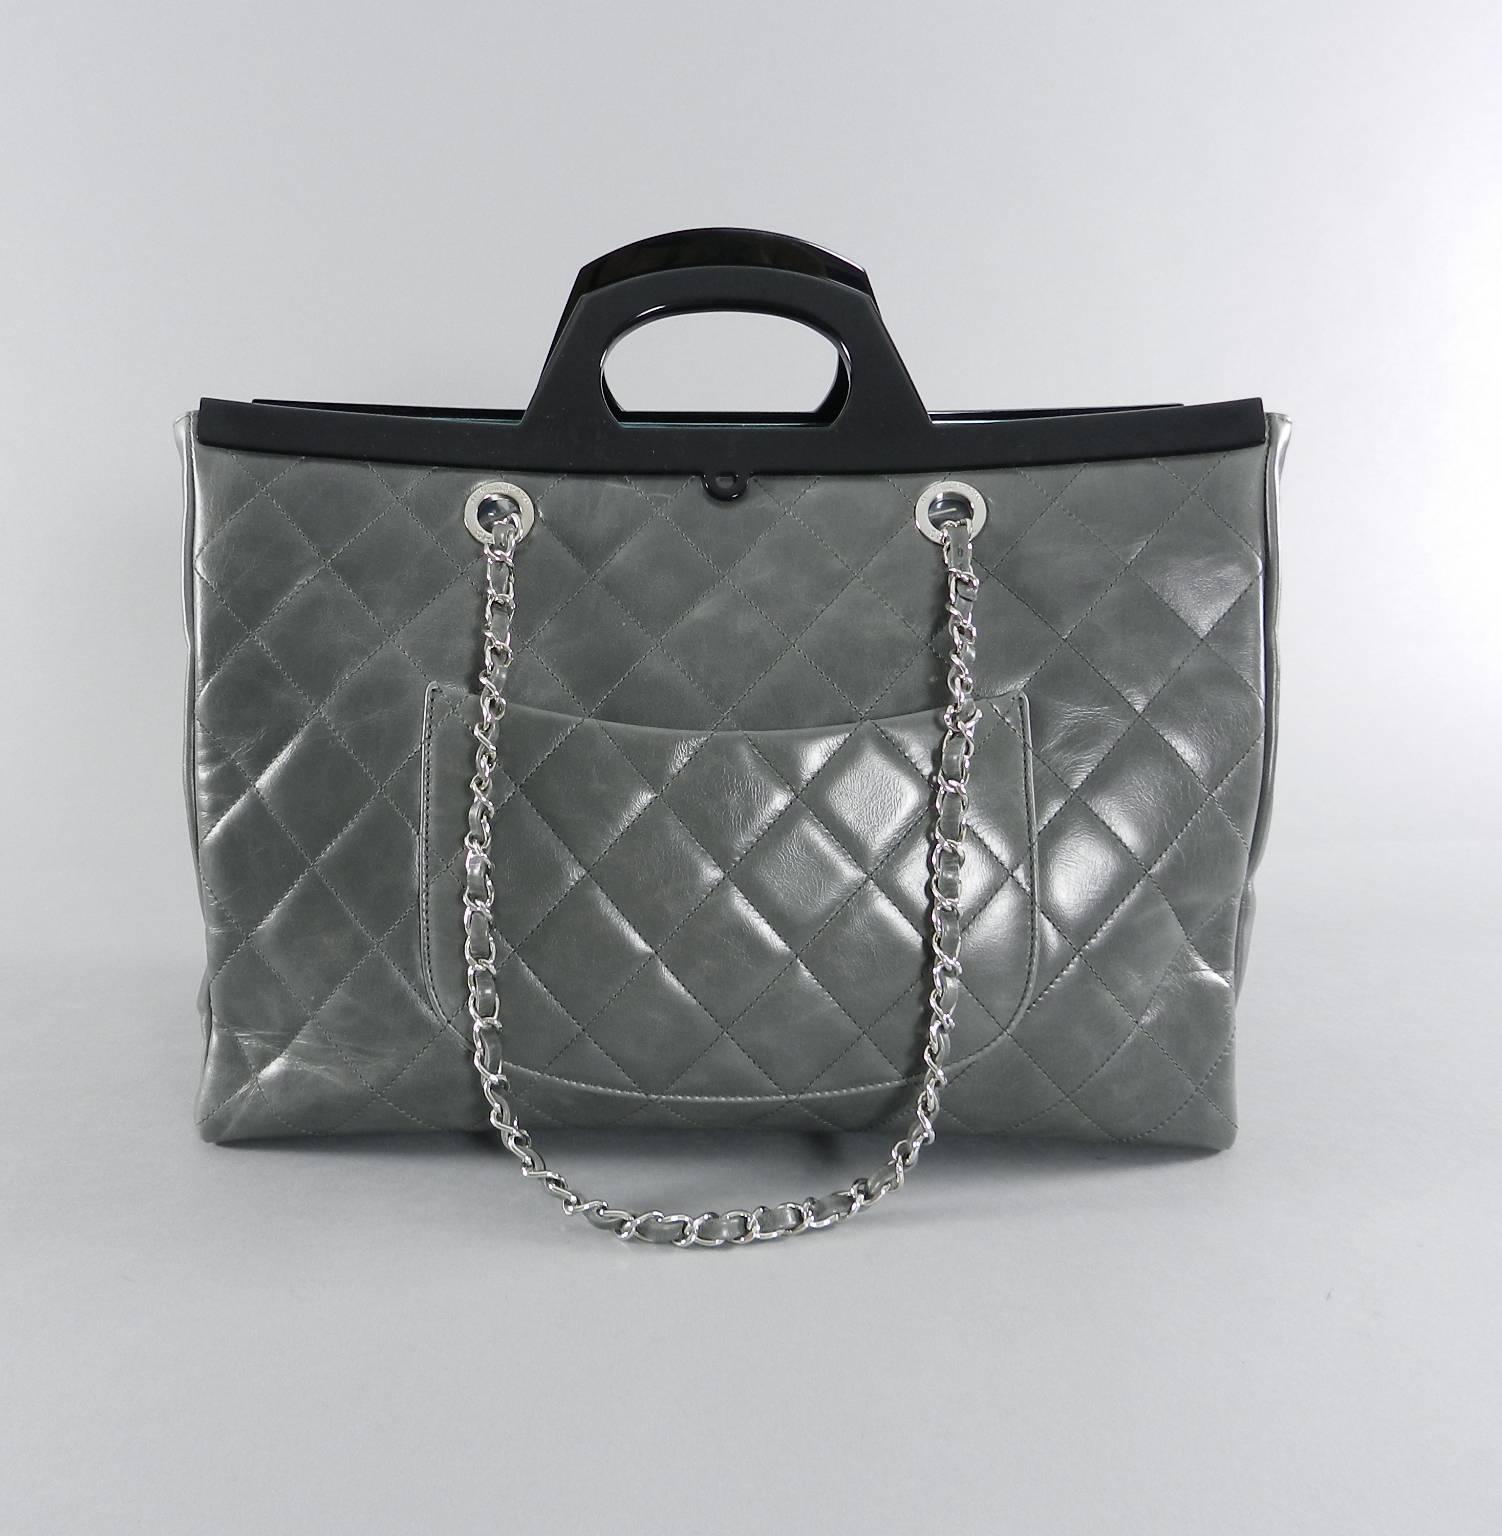 Chanel Fall 2014 Large Grey CC Delivery Shopping Tote Bag.  Large size quilted tote bag with  plastic frame and handle design and double chain straps. Small pocket on reverse and small compartment at front with cc turn clasp. Body measures 15 x 10.2